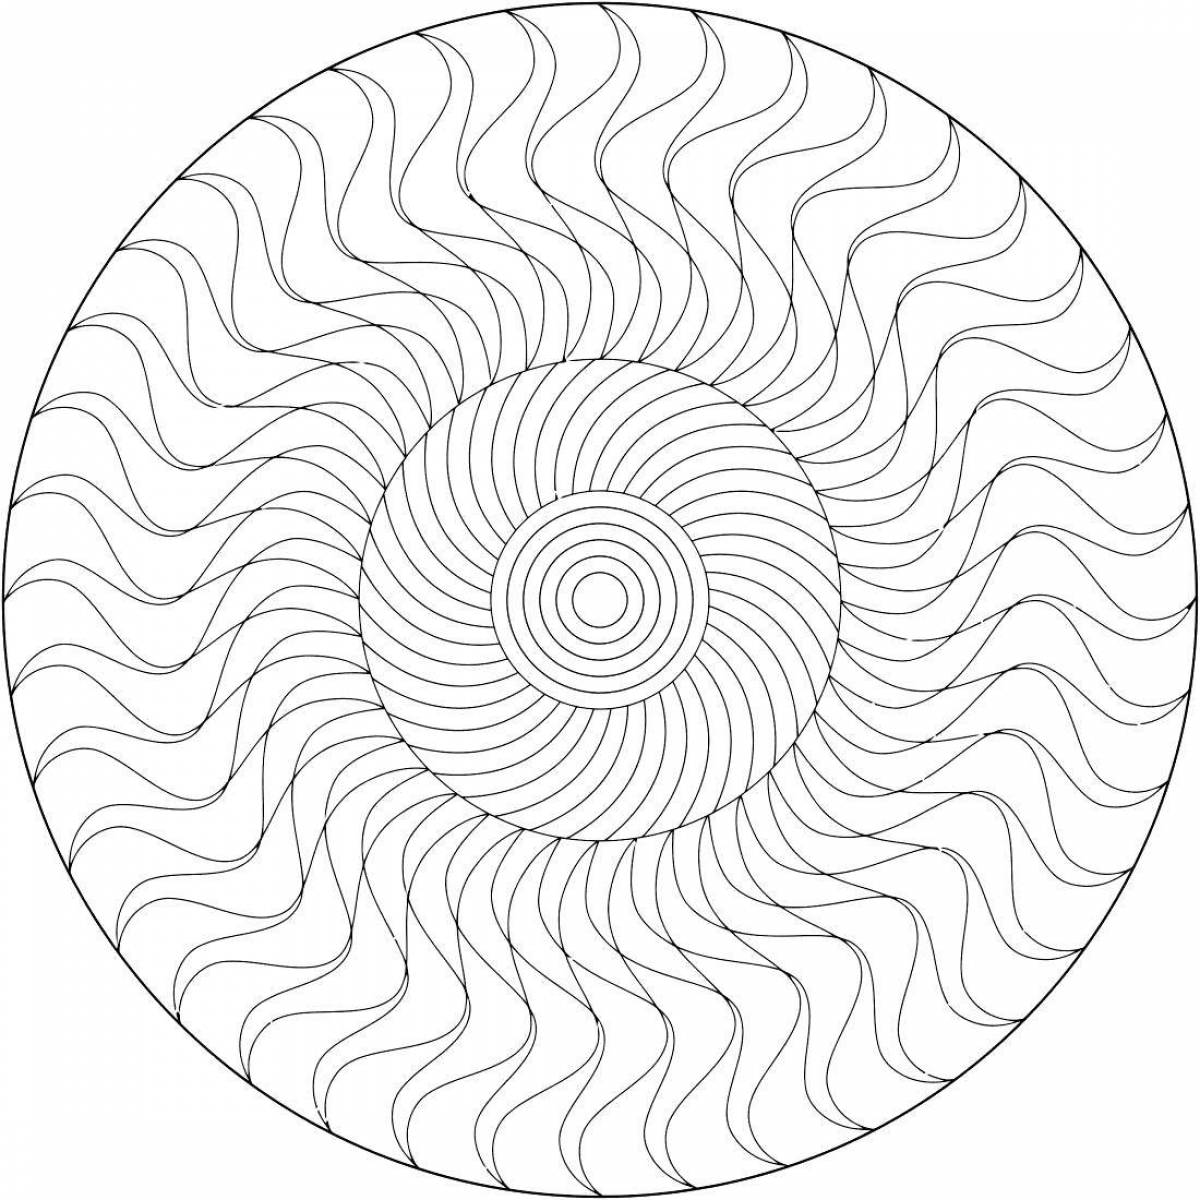 Living spiral coloring